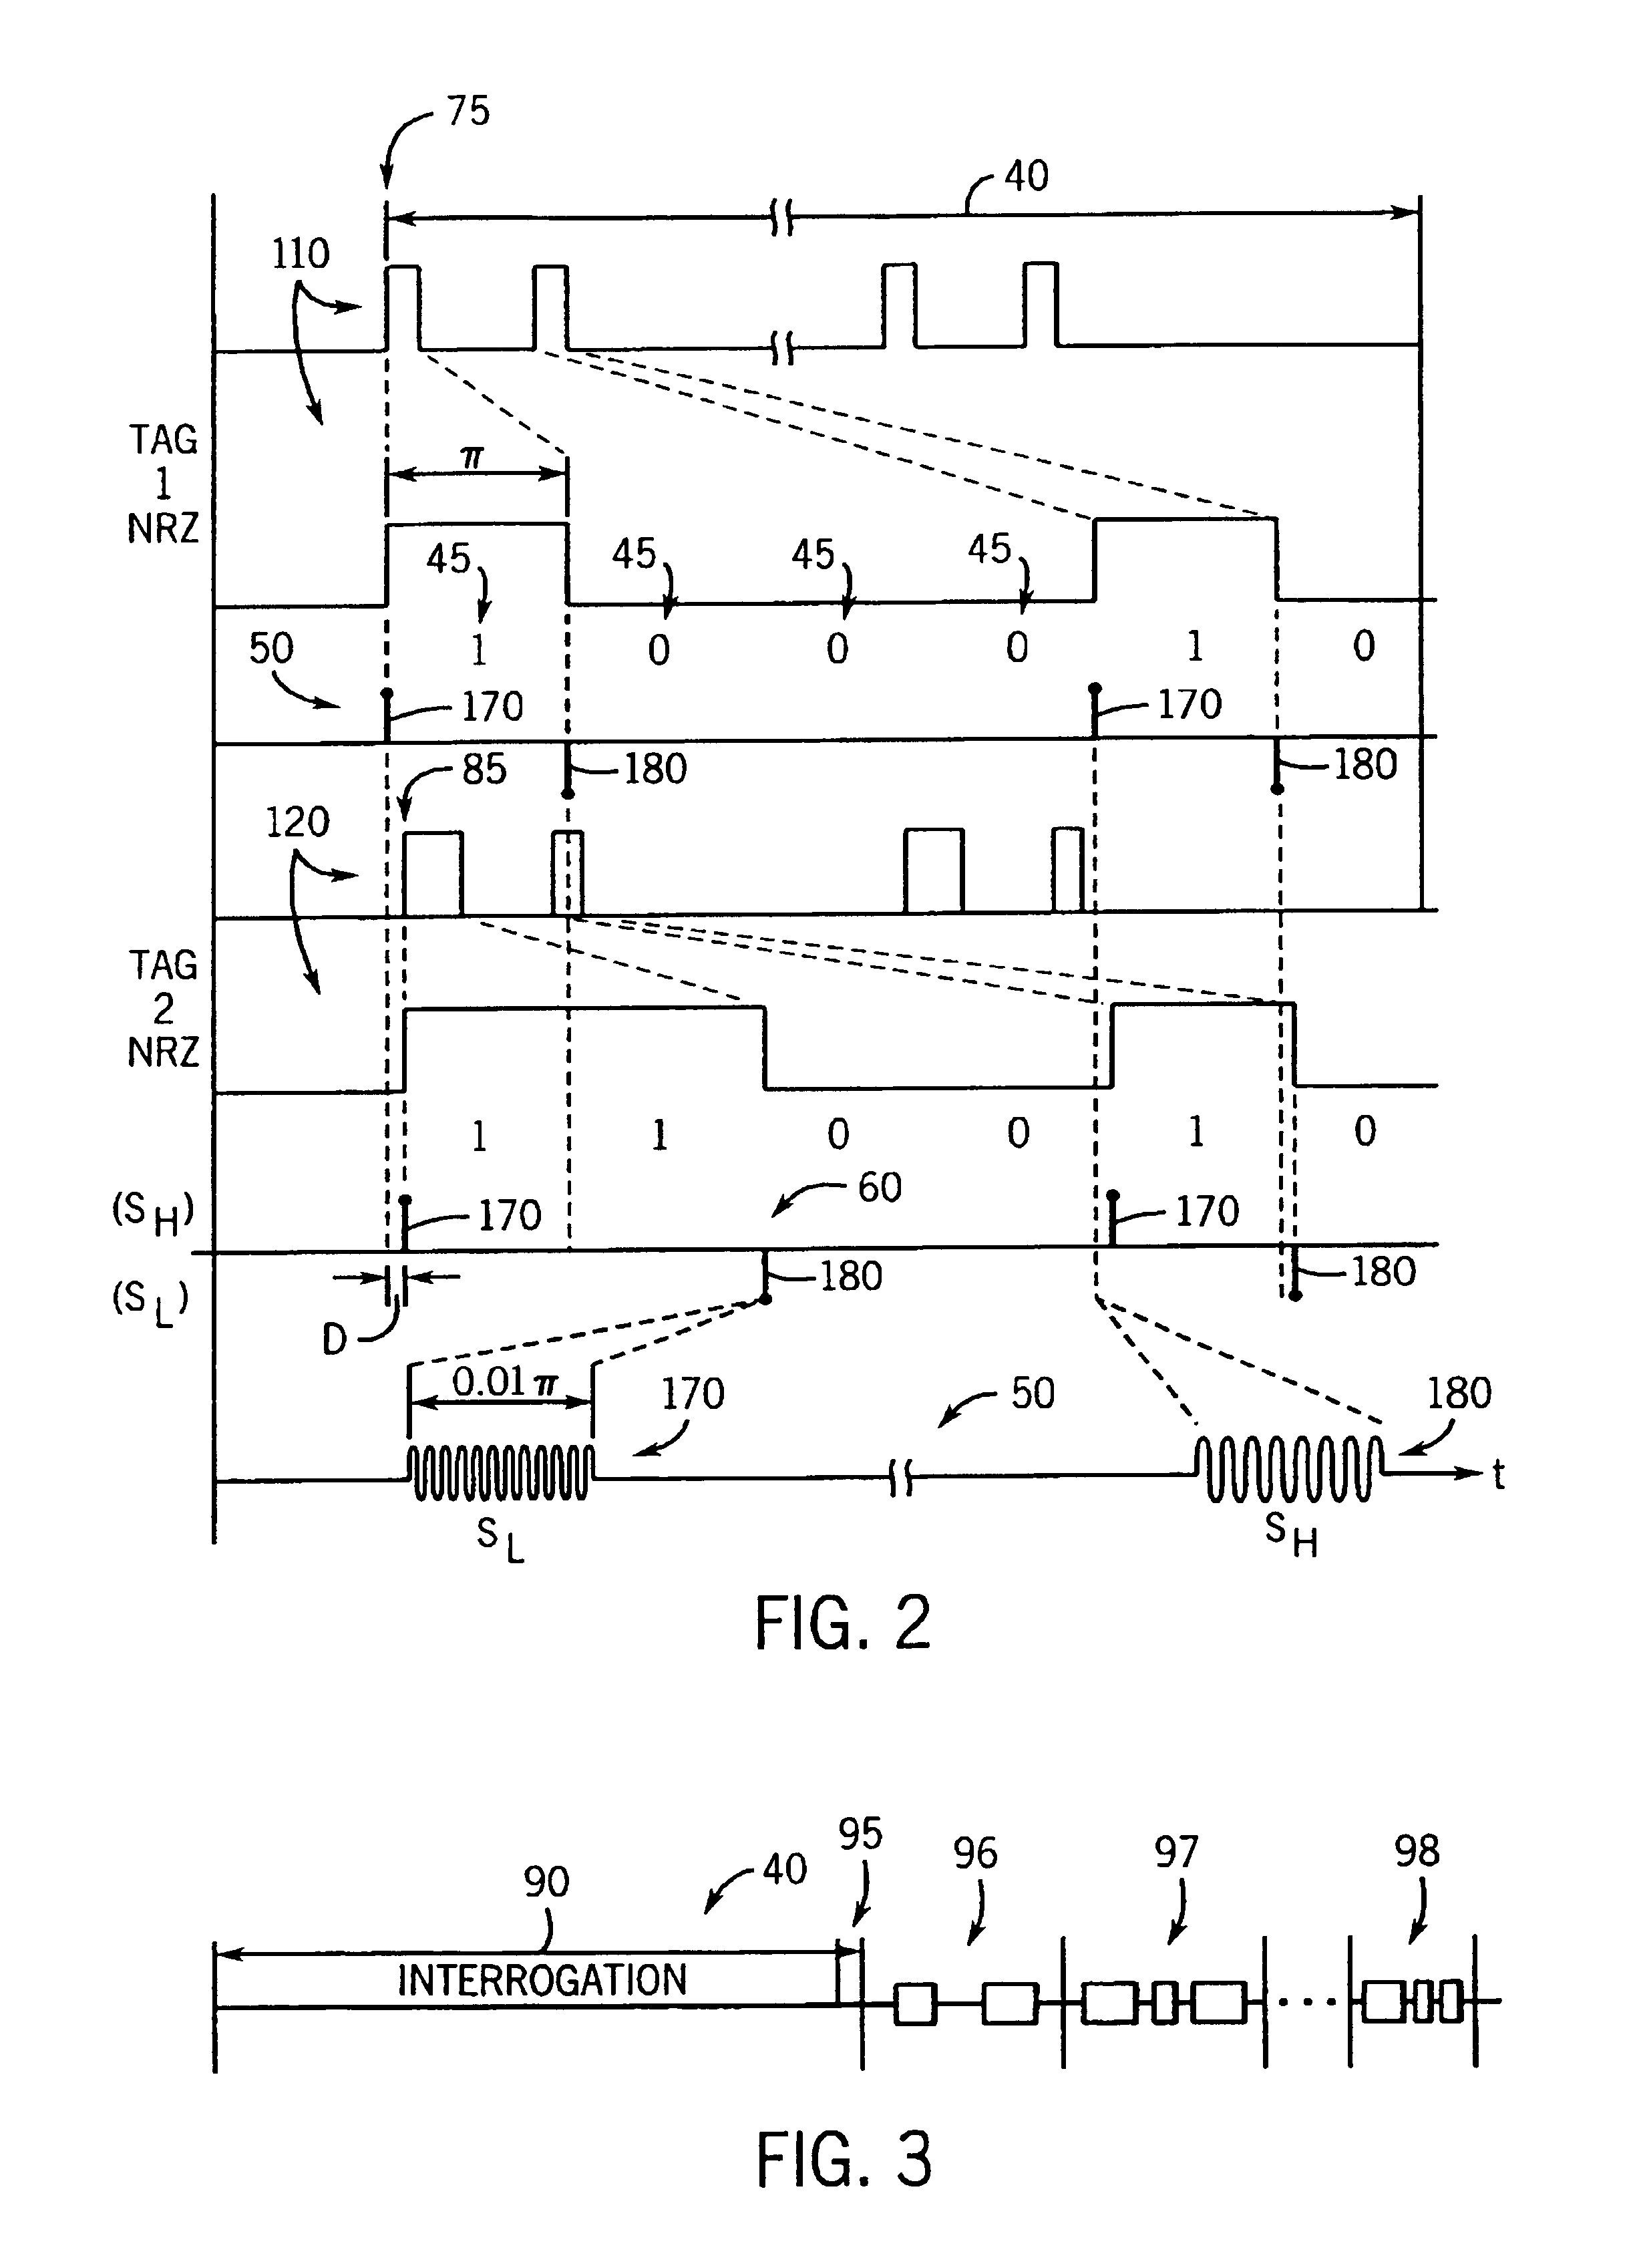 Method for communication between central terminal and multiple transponders